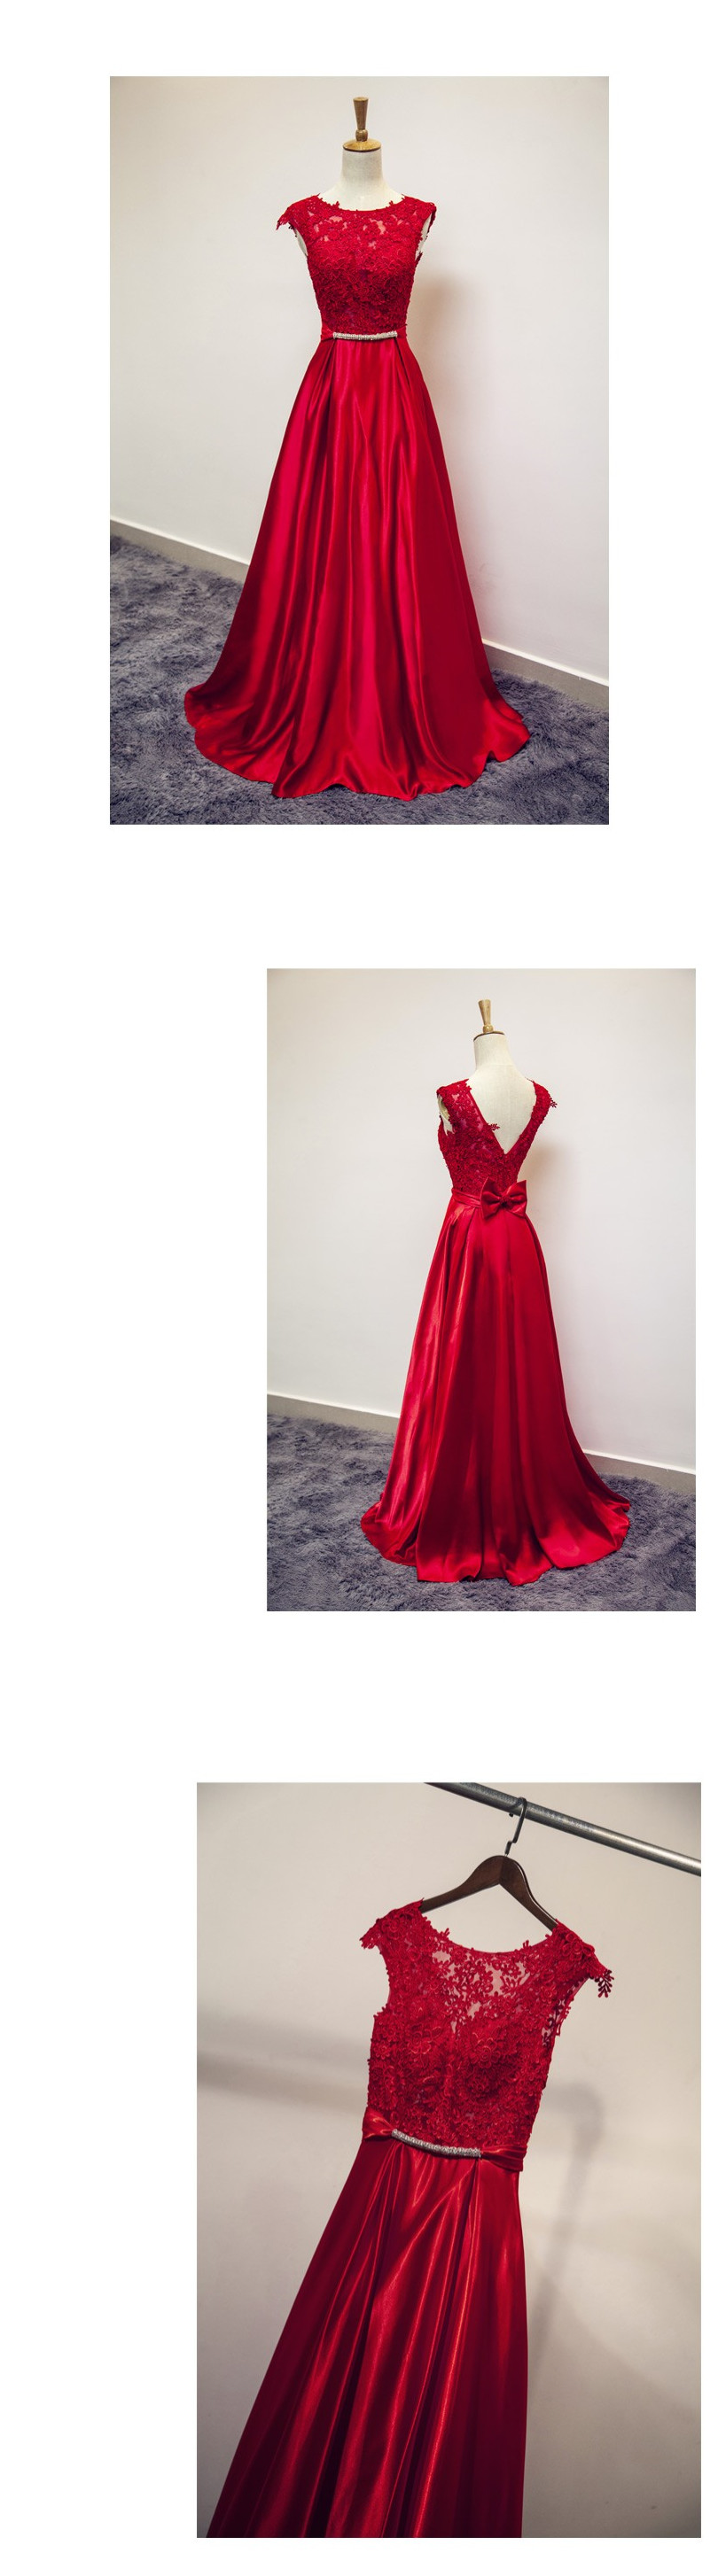 Prom Dresses Red Lace Neck Formal Evening Party Dresses Vestido De Festa,2018 Red Lace Formal Gowns , Long Evening Dress, Sexy Women Party